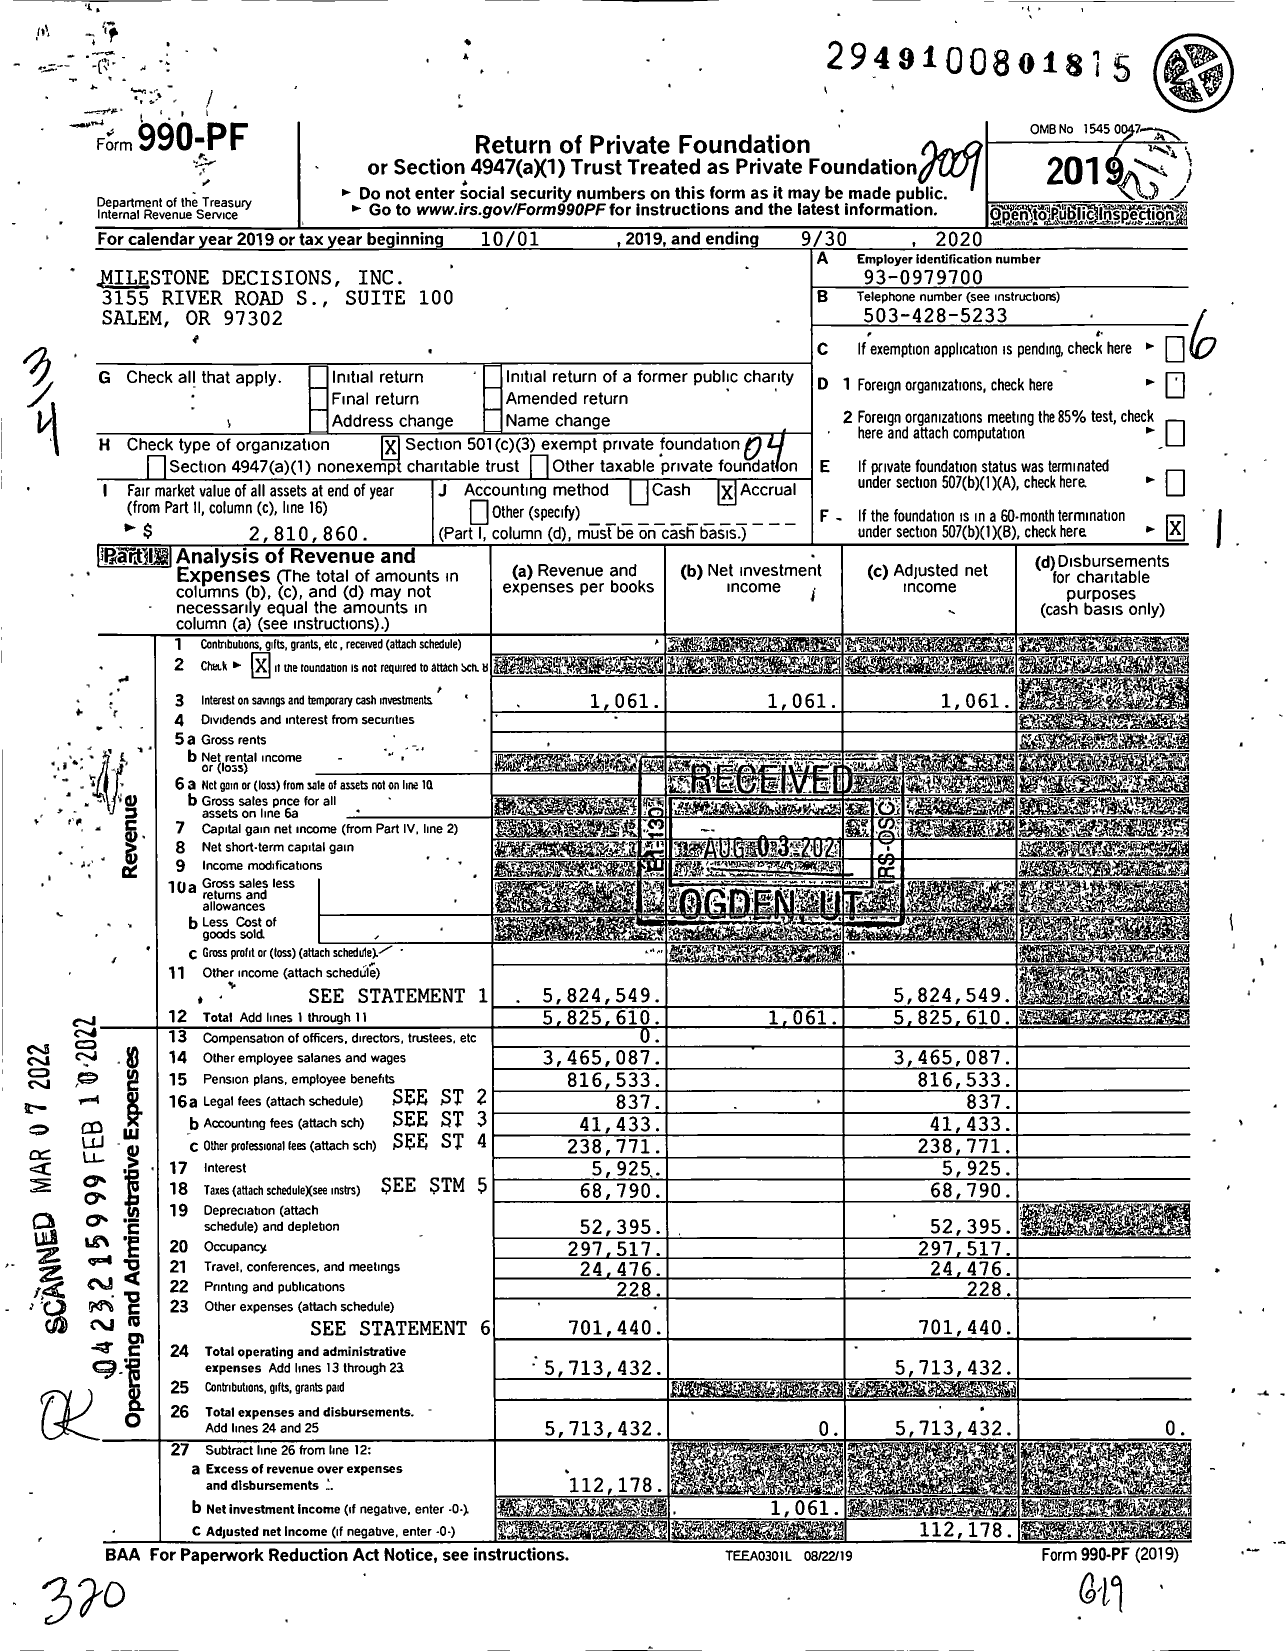 Image of first page of 2019 Form 990PF for Milestone Decisions